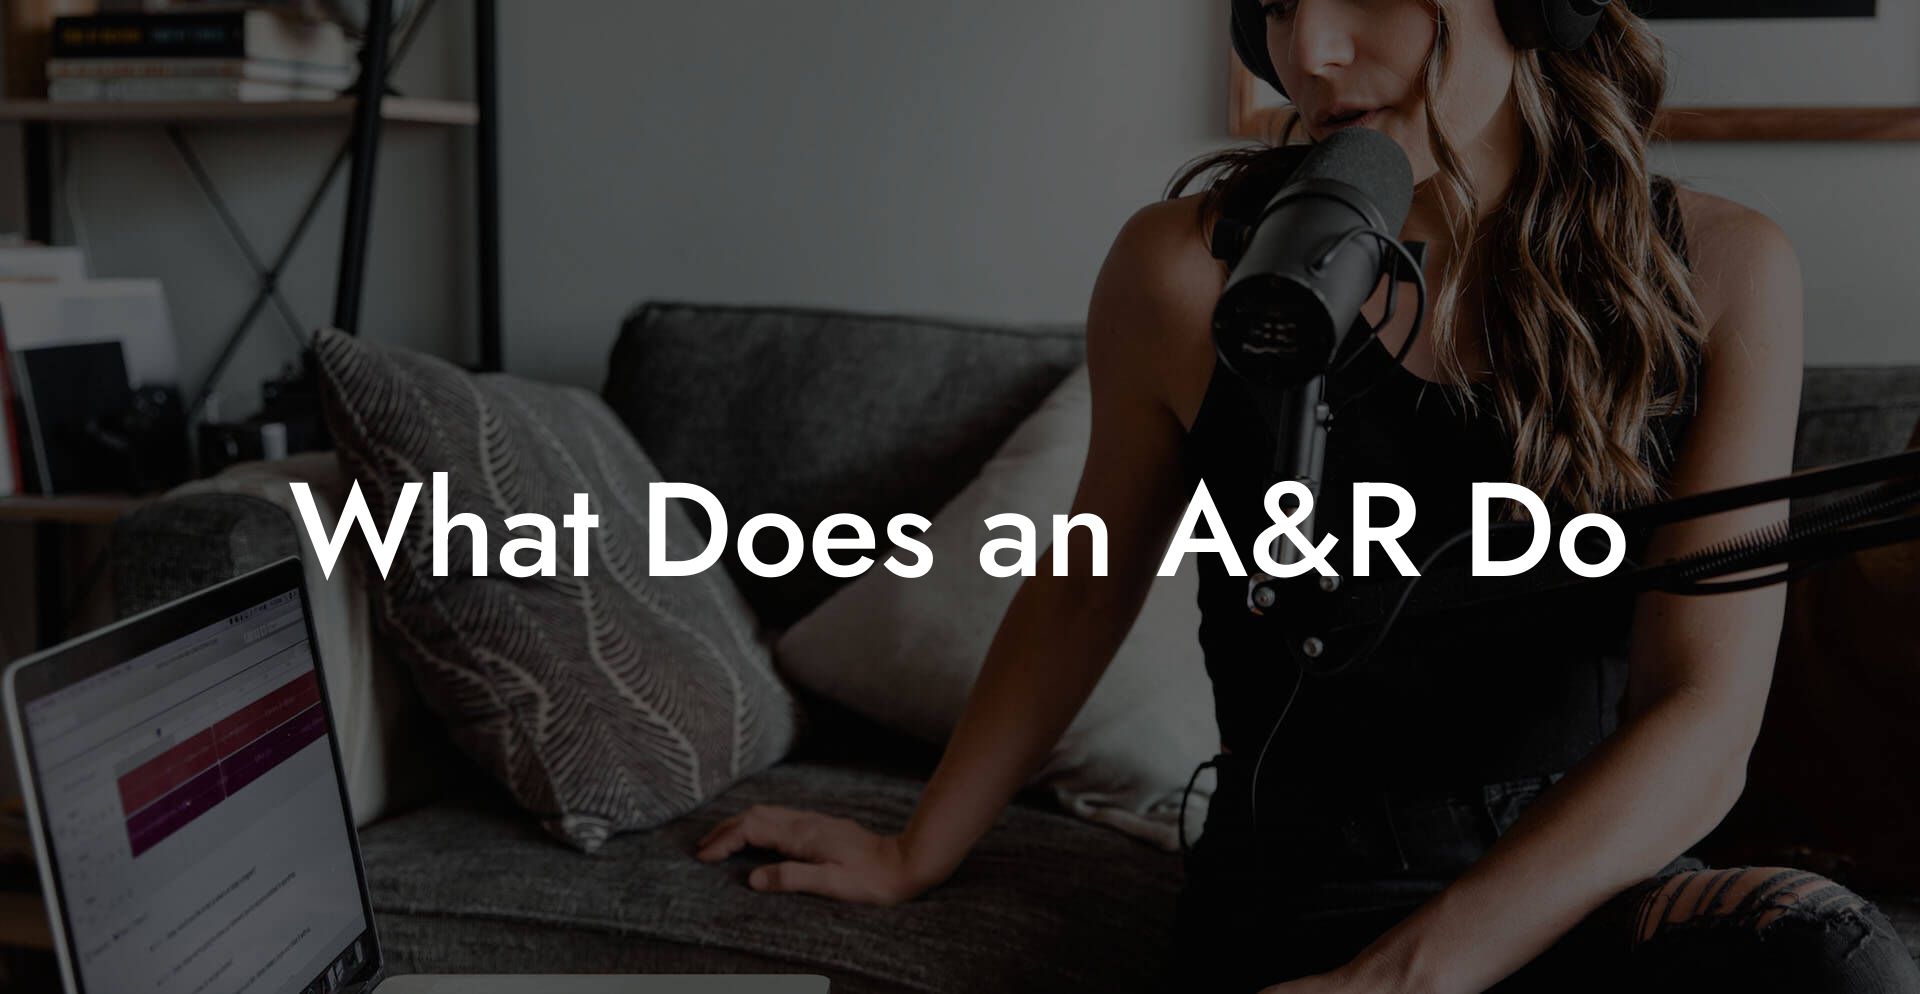 What Does an A&R Do